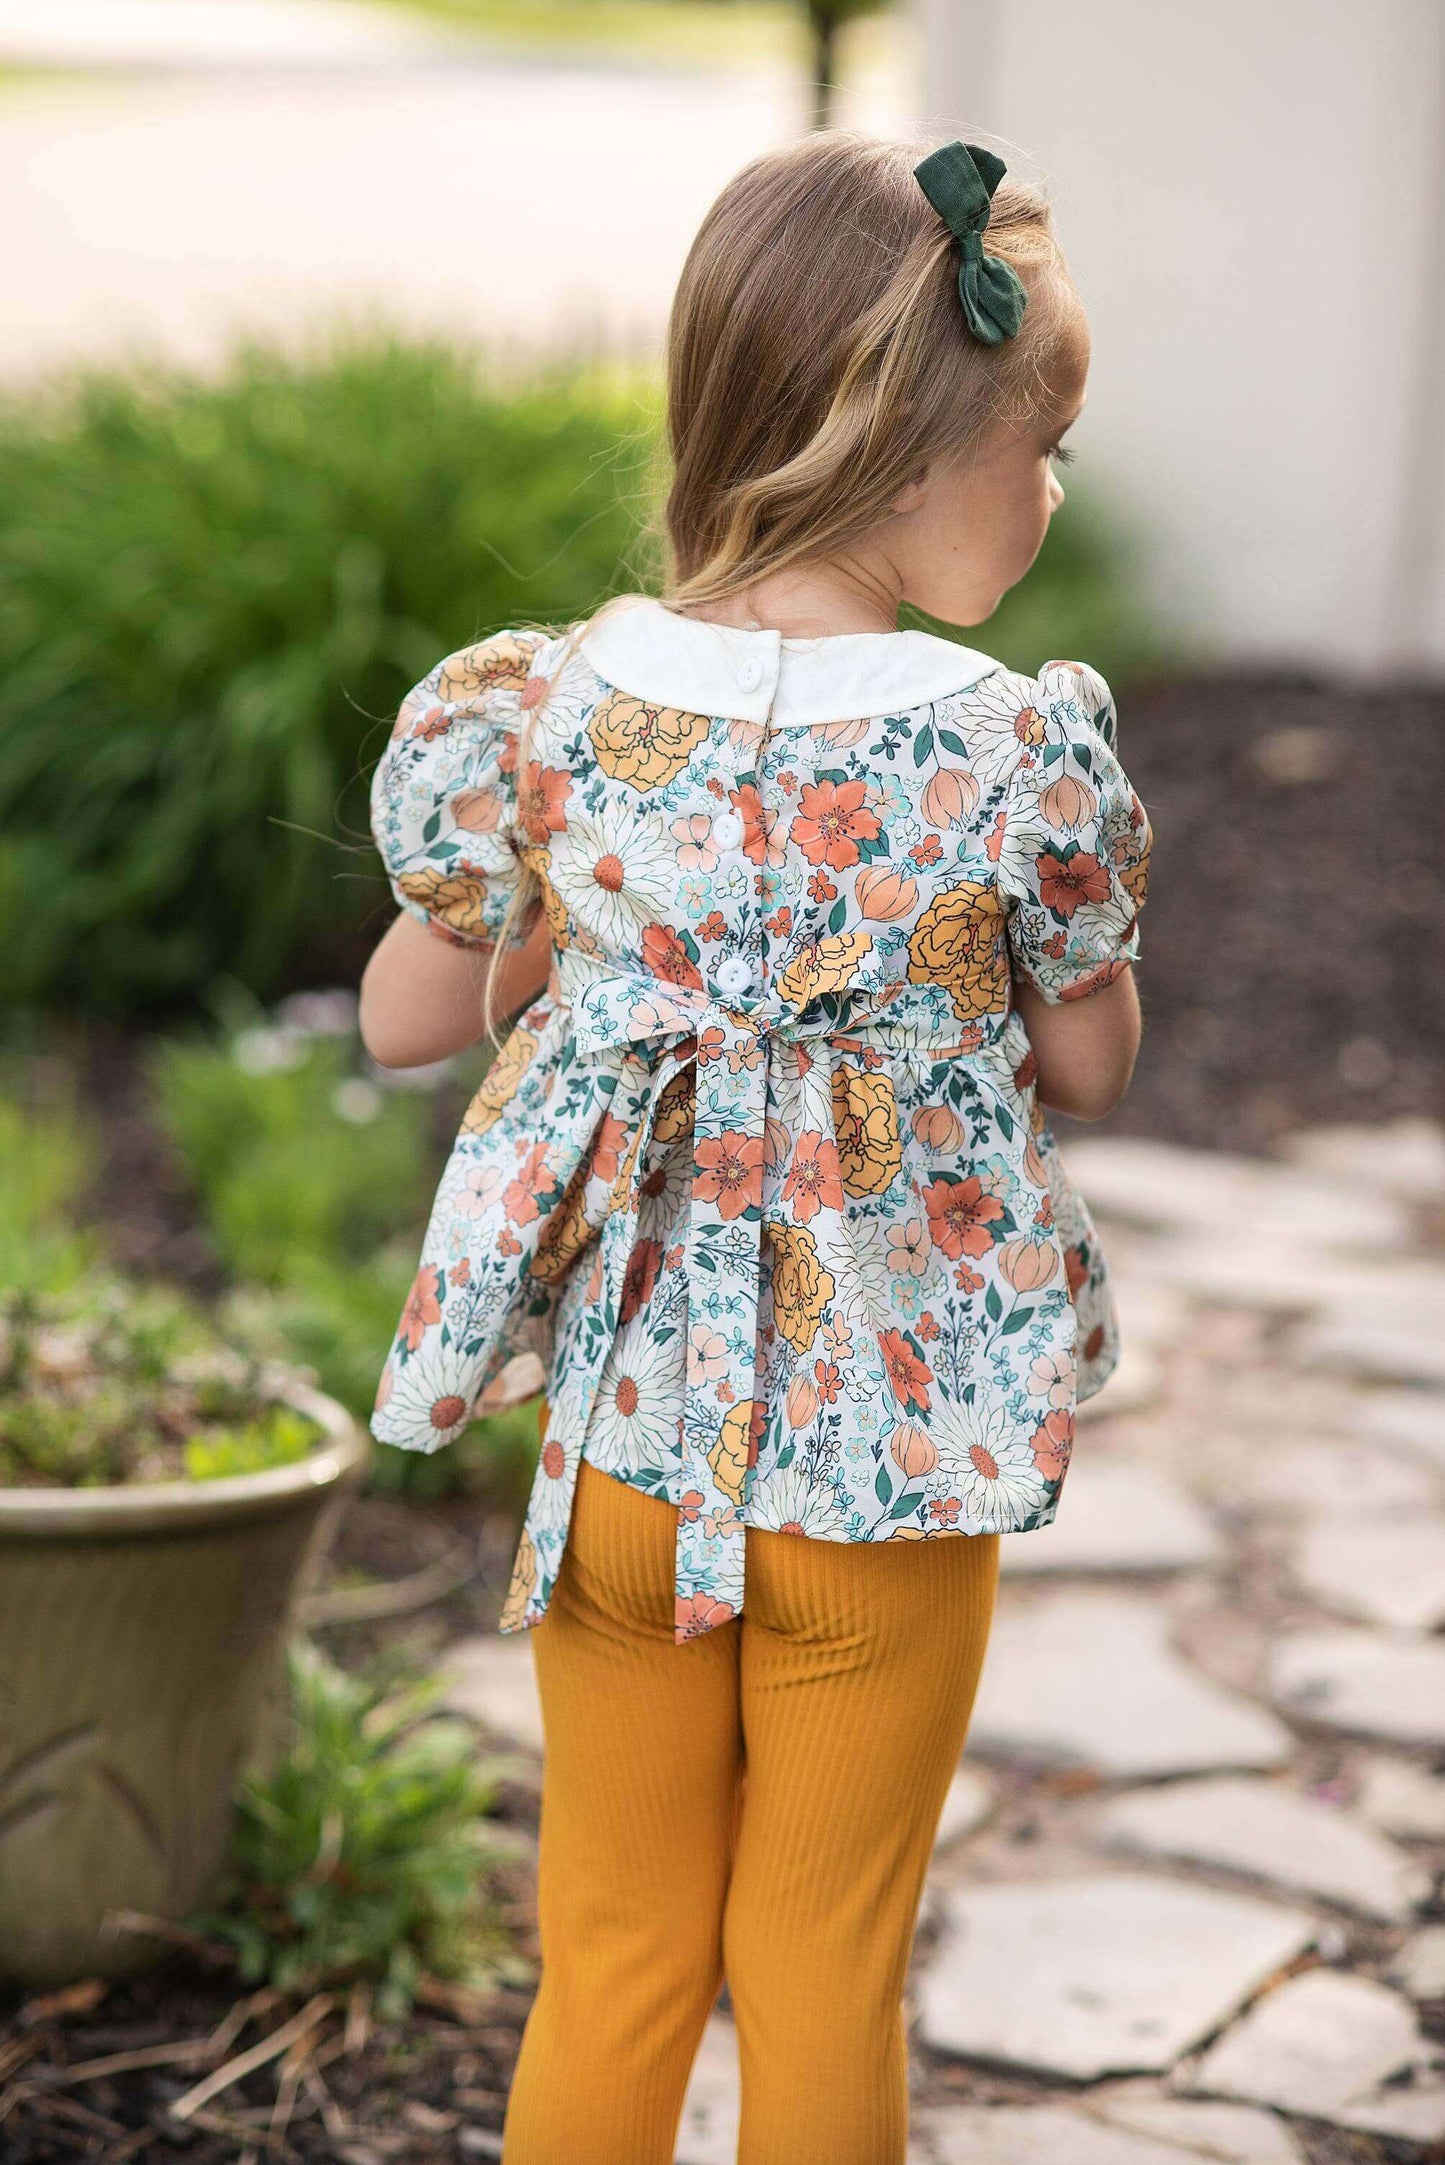 Girls Floral Top and Leggings Outfit